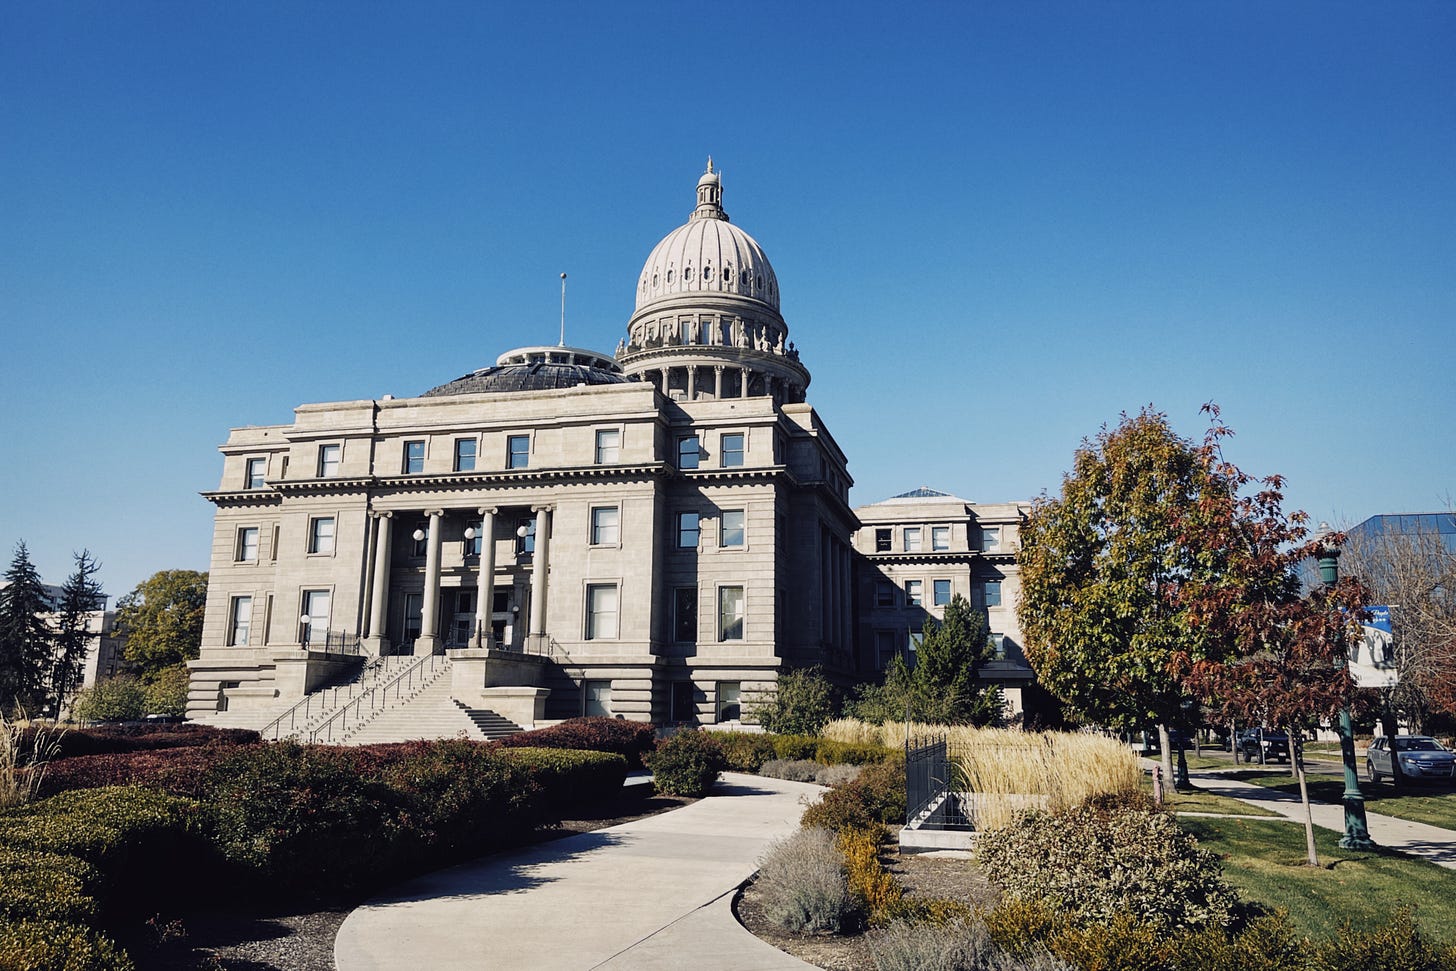 A photograph of the Idaho State Capitol building in Boise, pictured on a very sunny autumn day with a beautiful blue sky, and quite literally, not a cloud in sight.